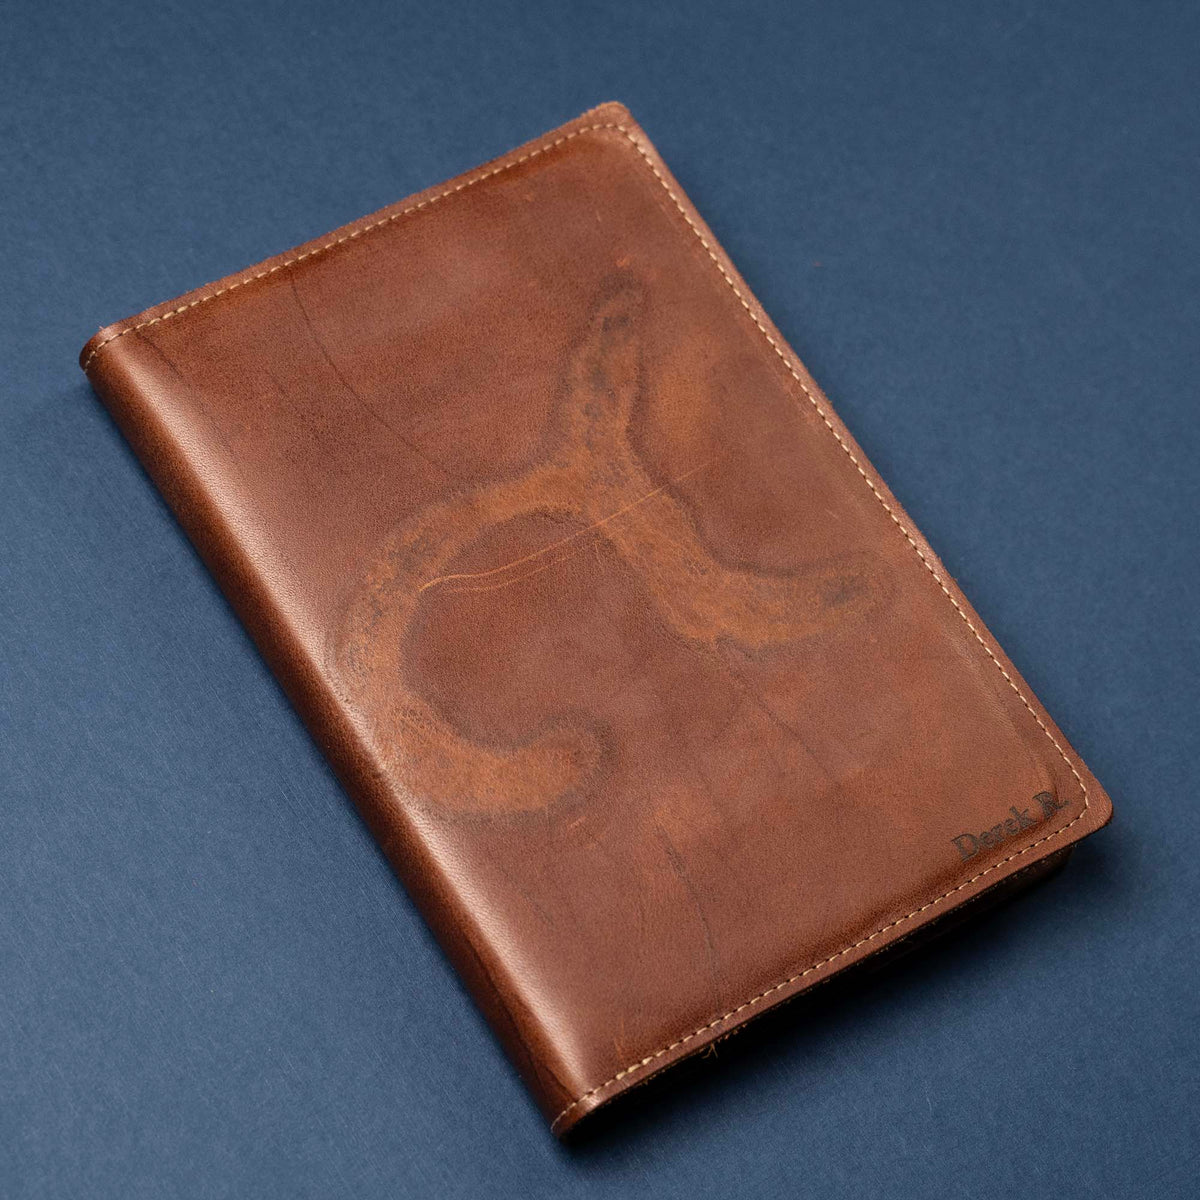 Branded Cowhide - A5 Leather Journal - Personalized High Character (One-Of-A-Kind) Notebooks - 192 pages 8.75” x 6.25”